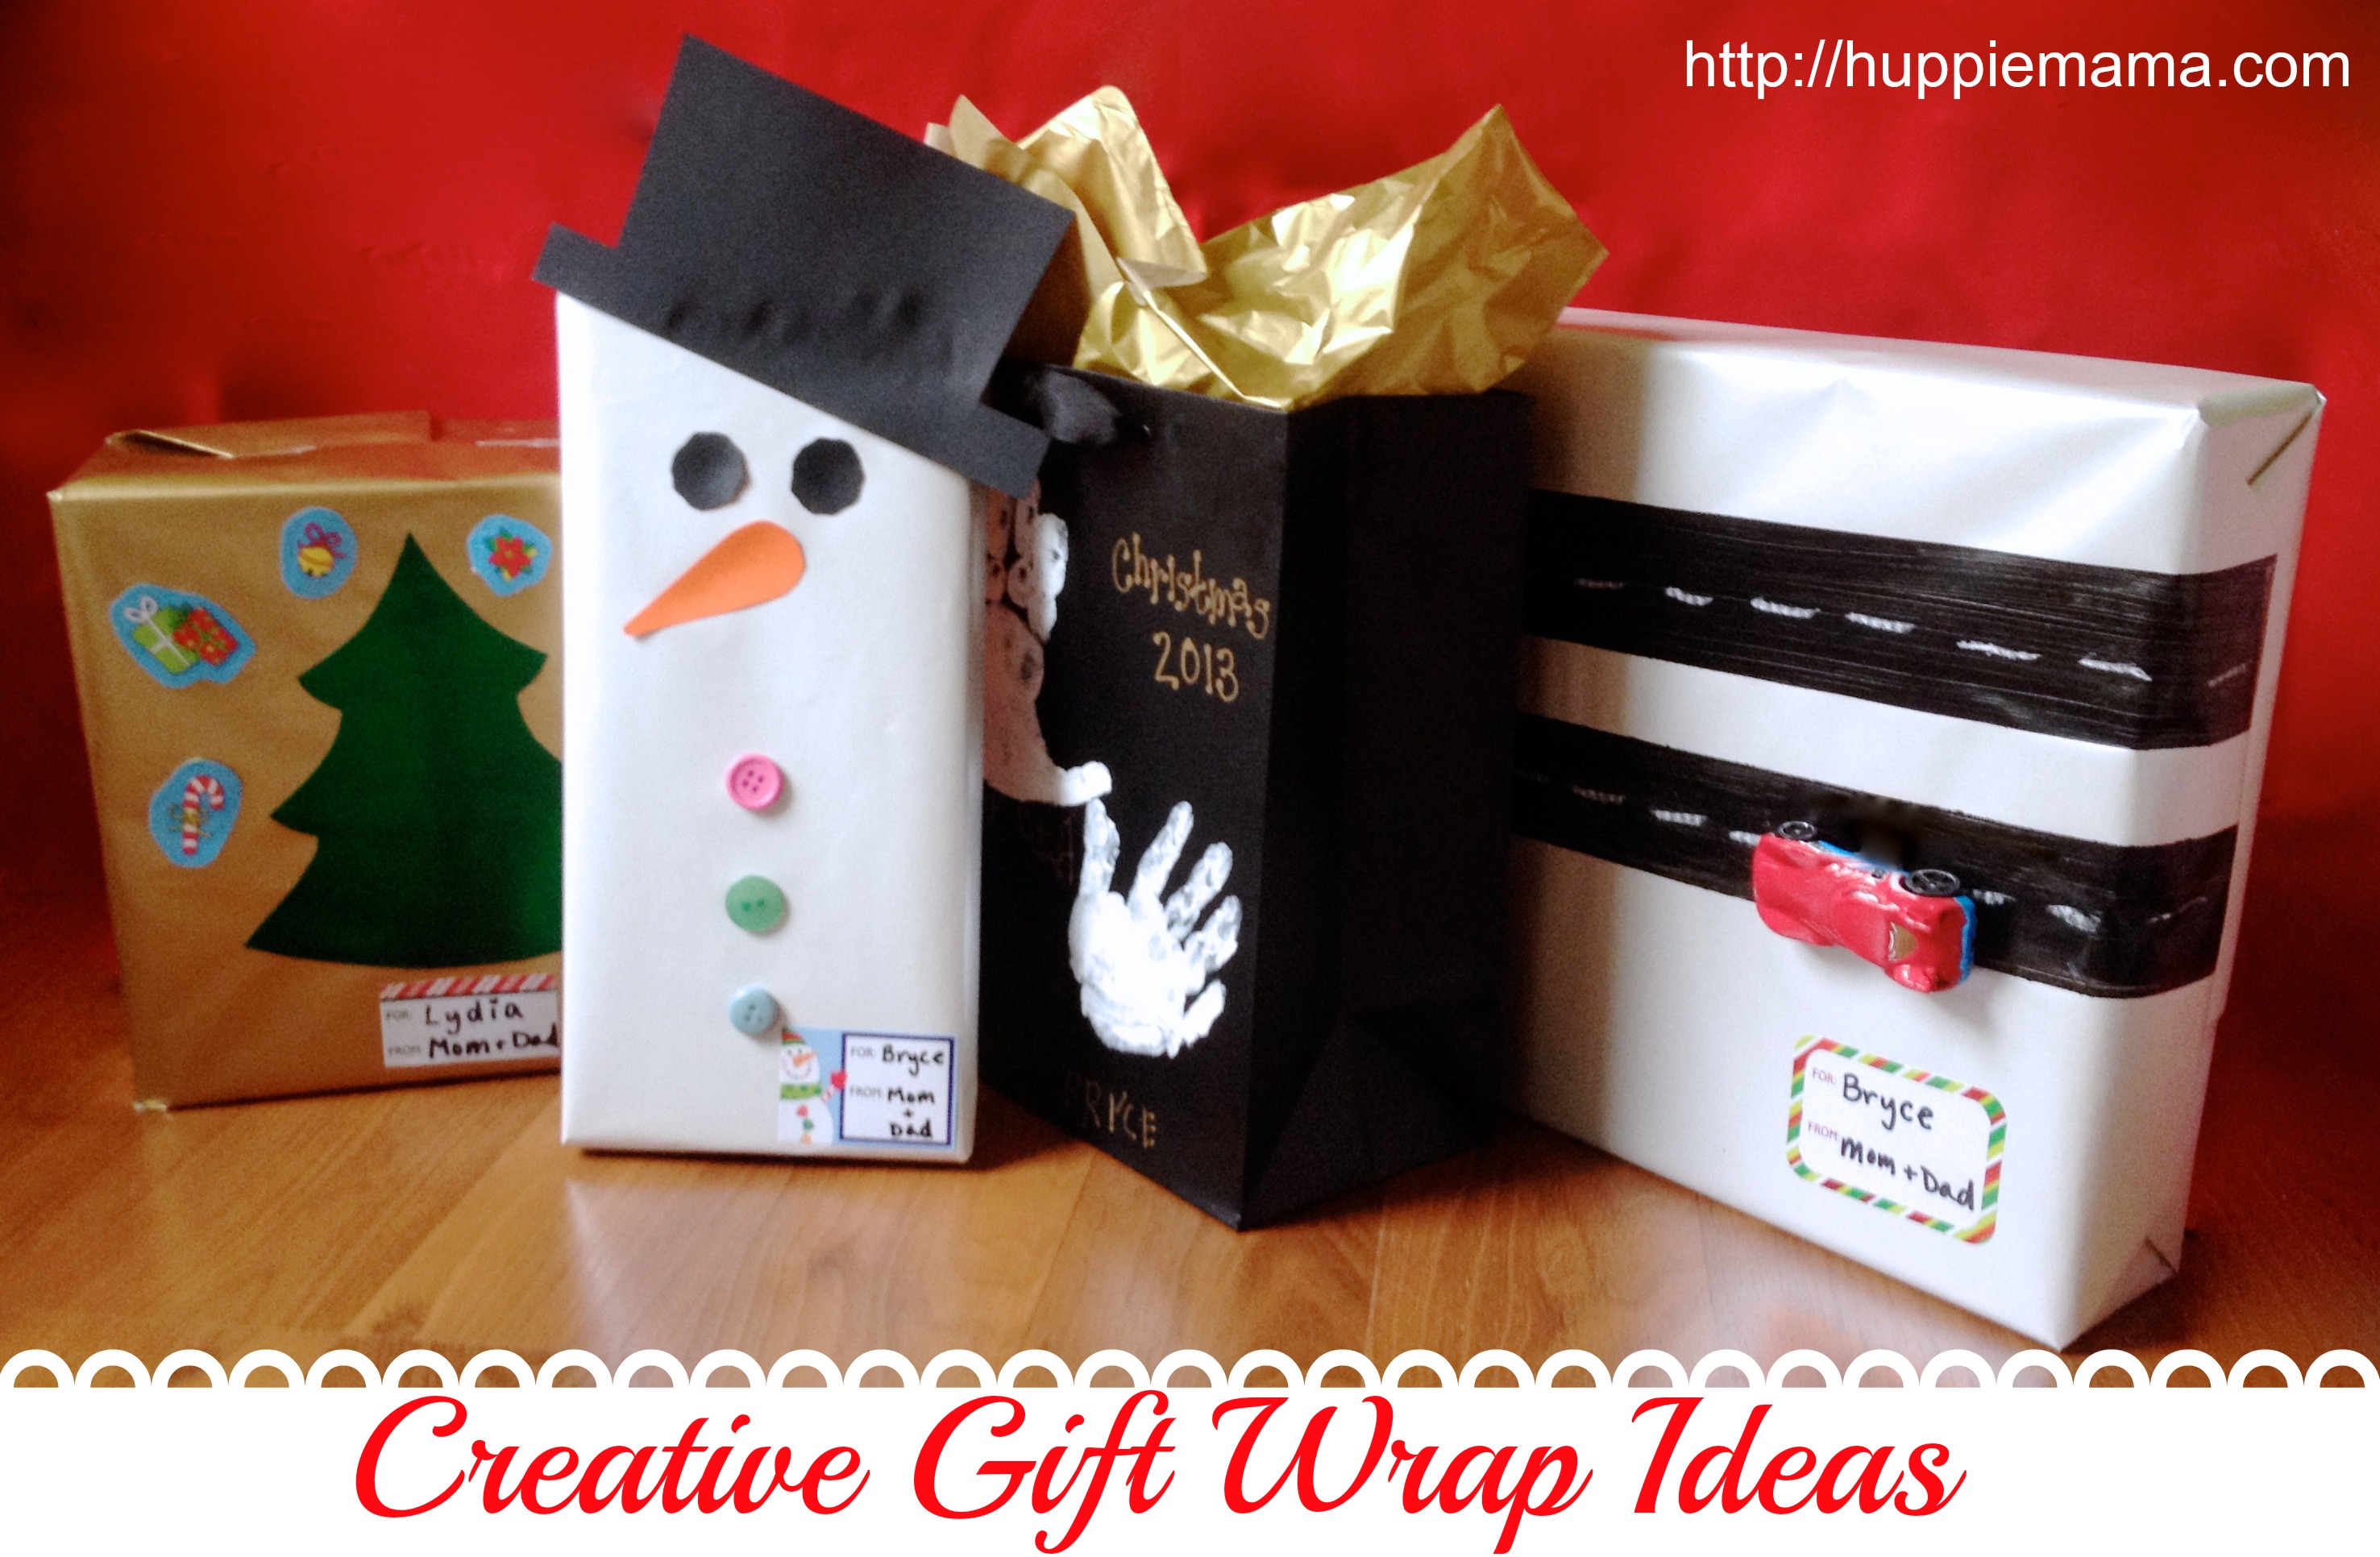 Creative Gift Wrapping Ideas - Our Potluck Family